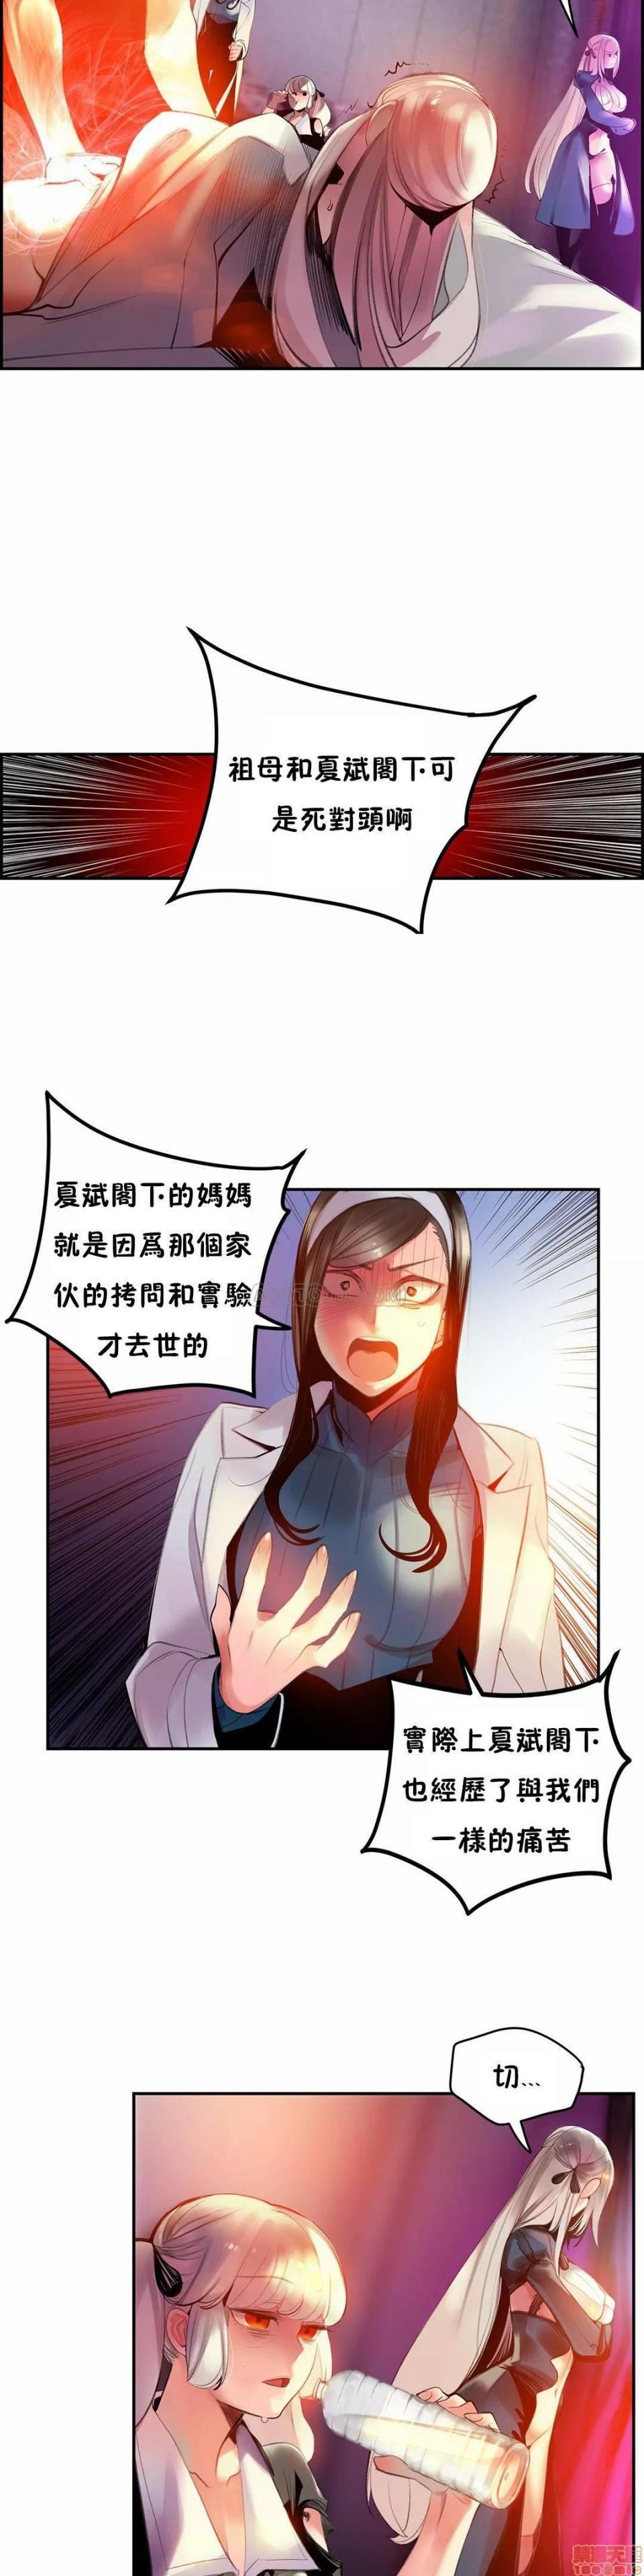 [Juder] Lilith`s Cord (第二季) Ch.77-93 end [Chinese] 39